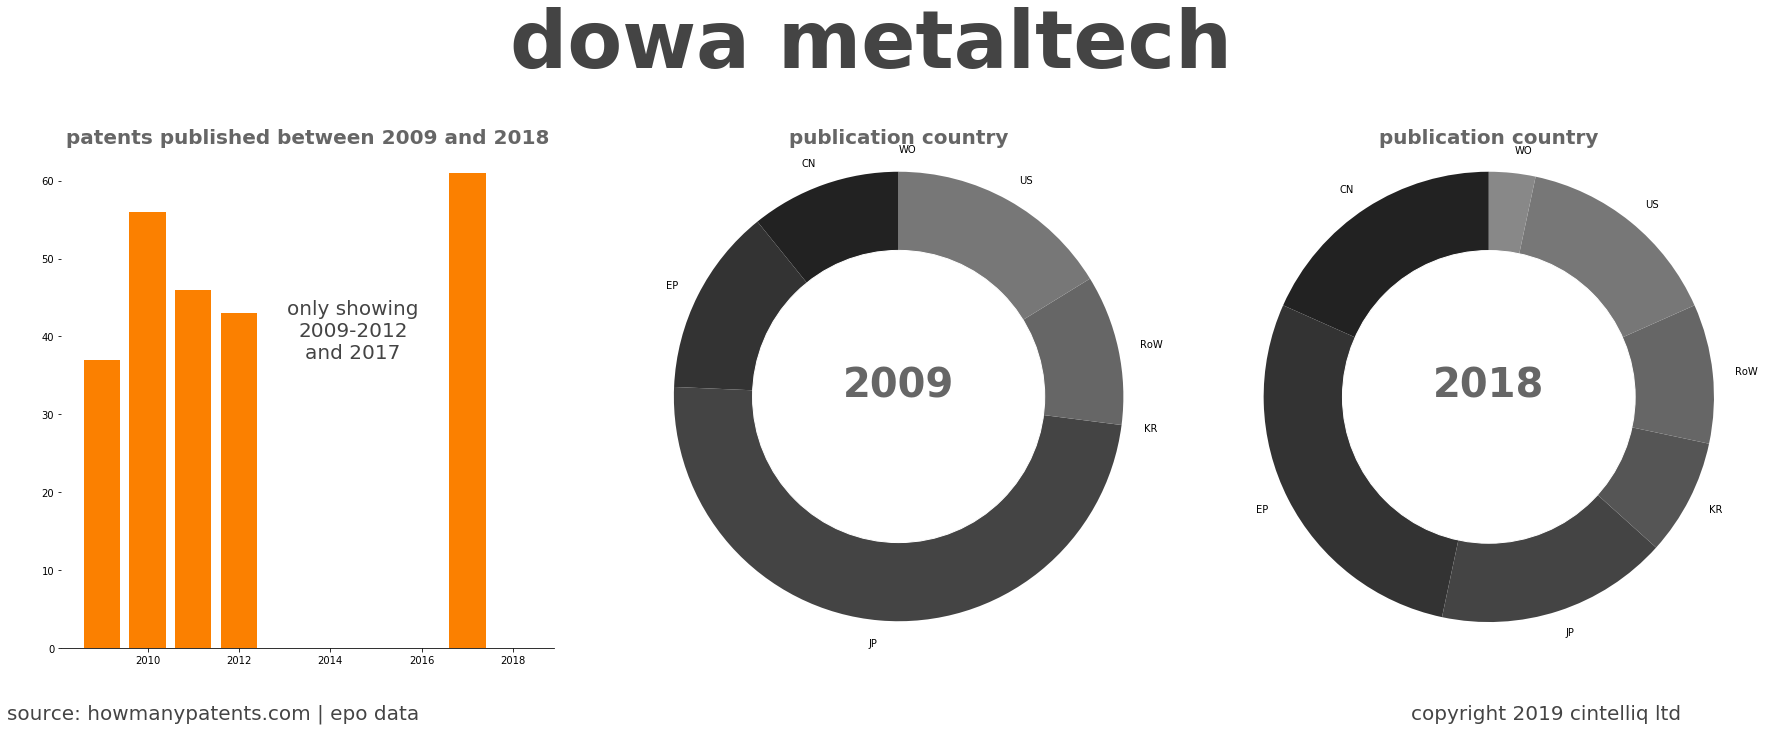 summary of patents for Dowa Metaltech